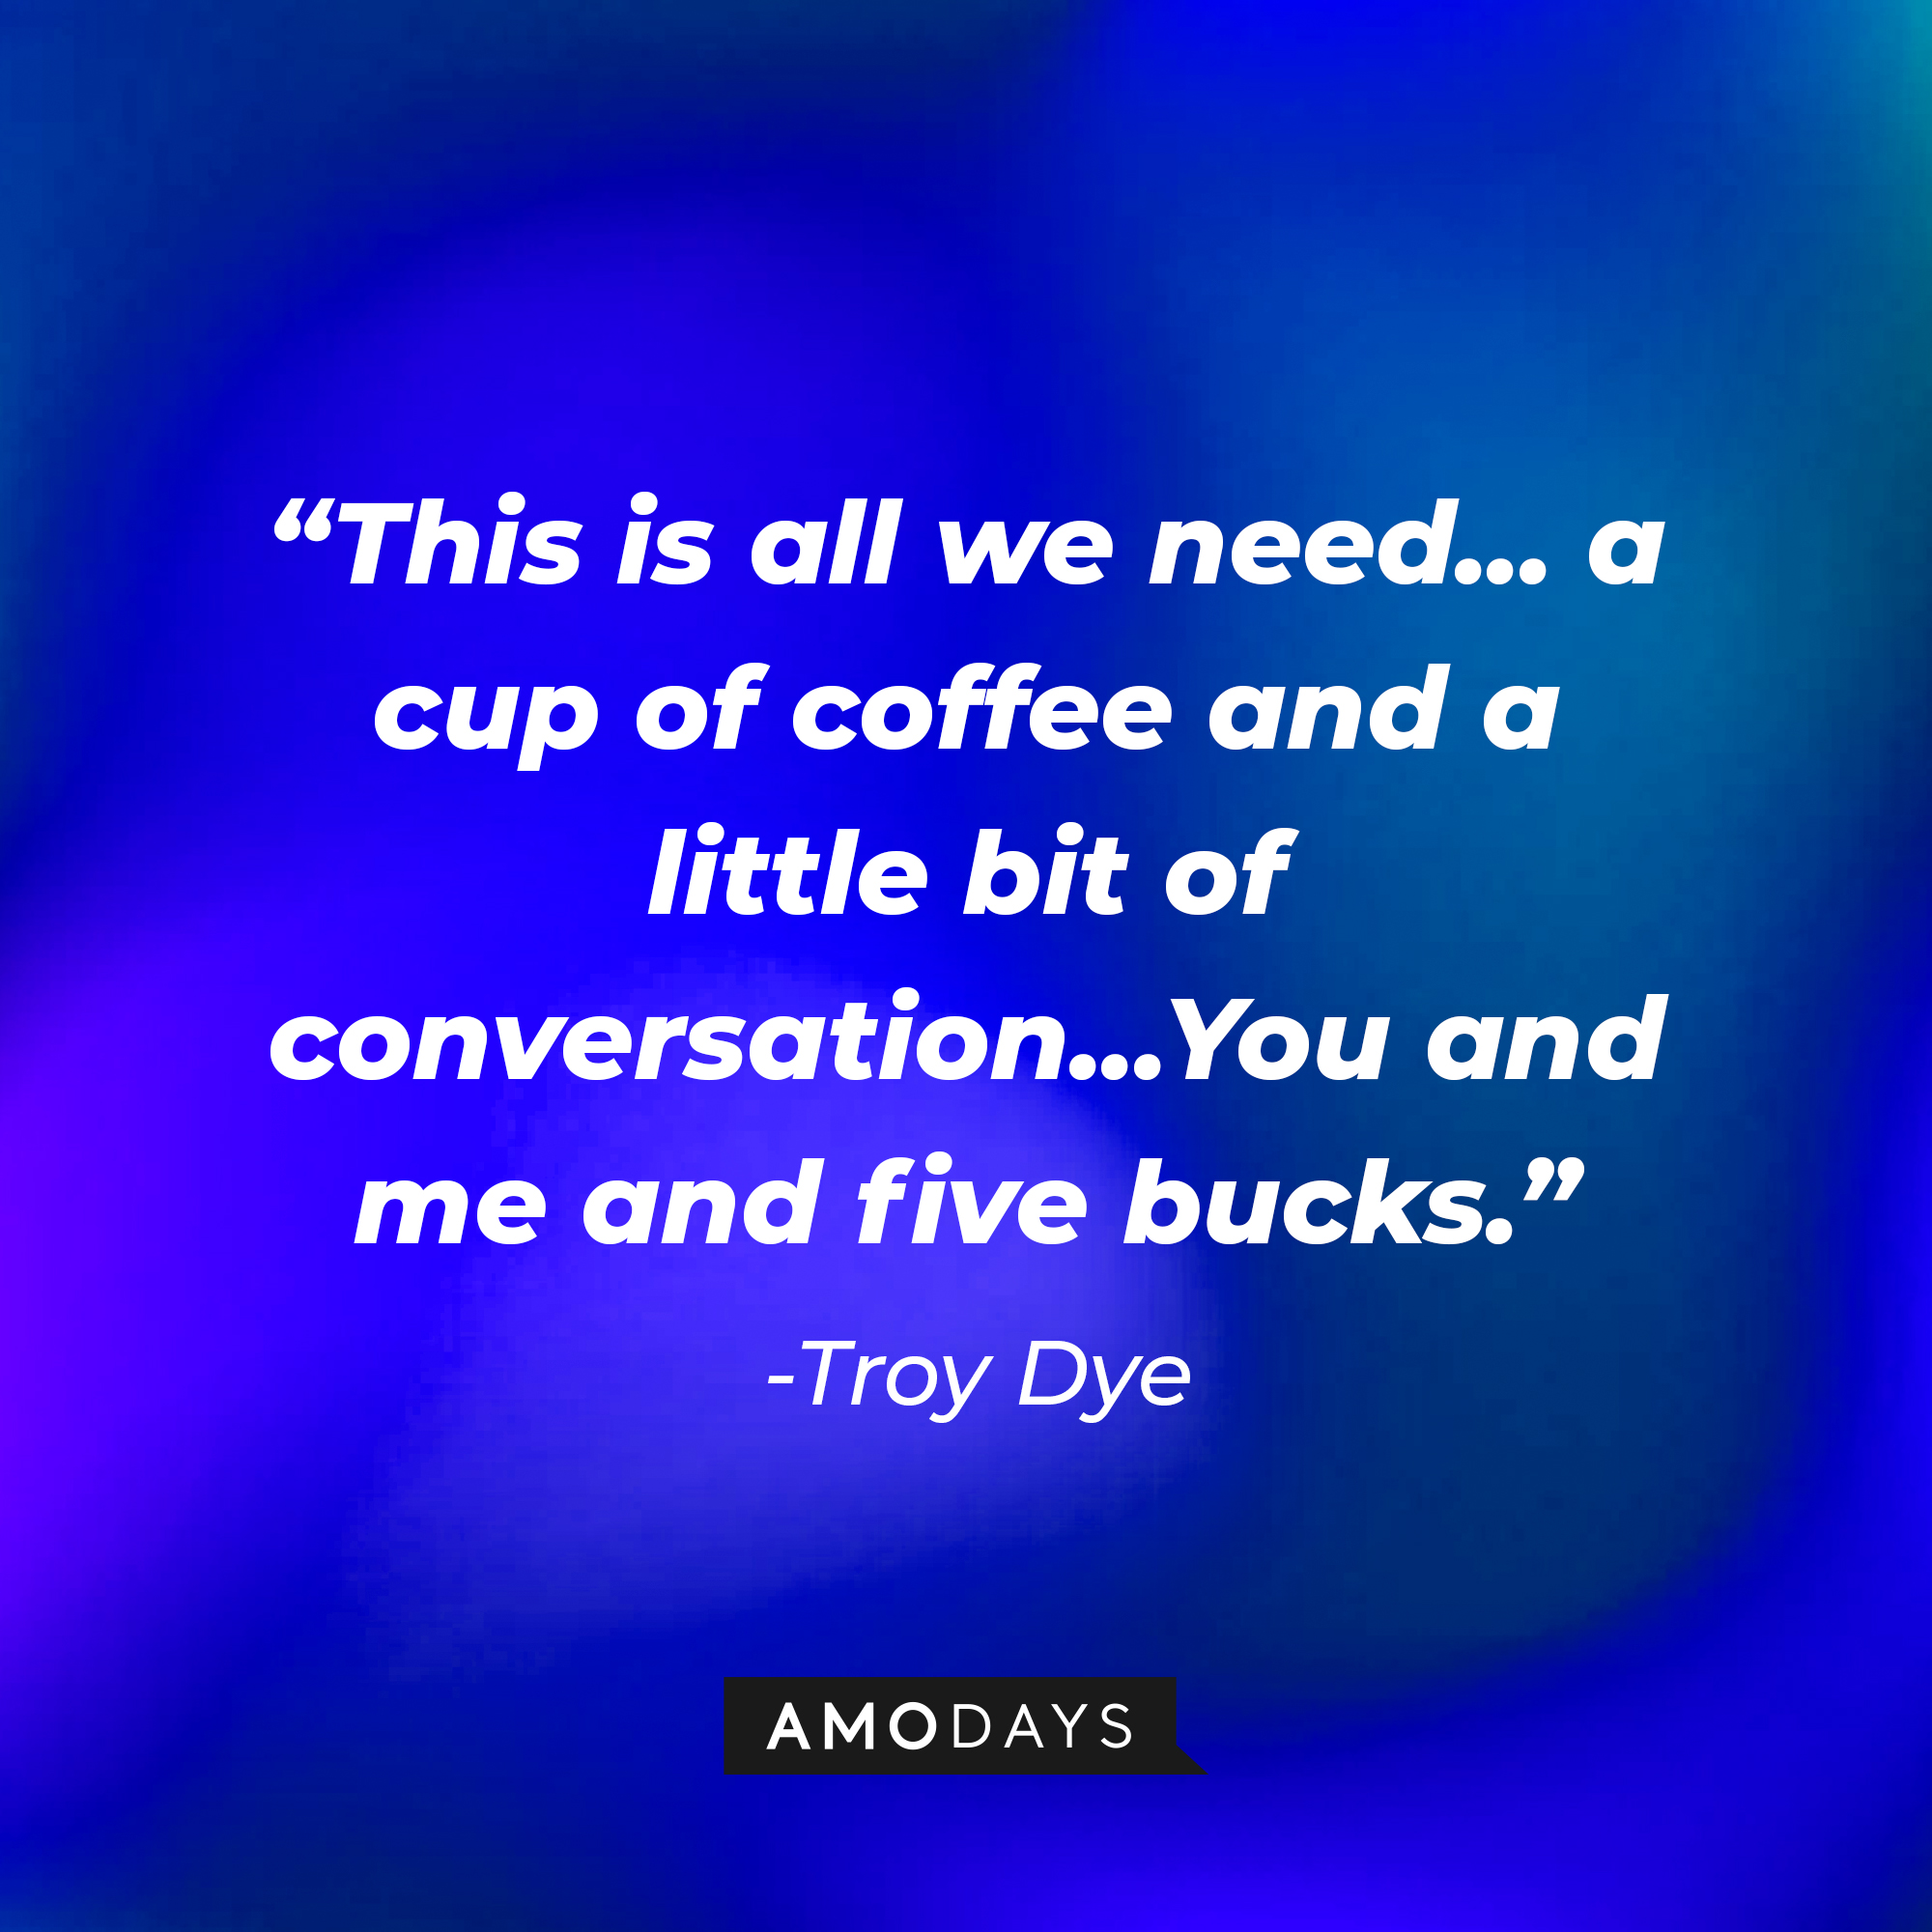 Troy Dyer’s quote: “This is all we need...a cup of coffee, and a little bit of conversation... You and me and five bucks.” | Source: AmoDays